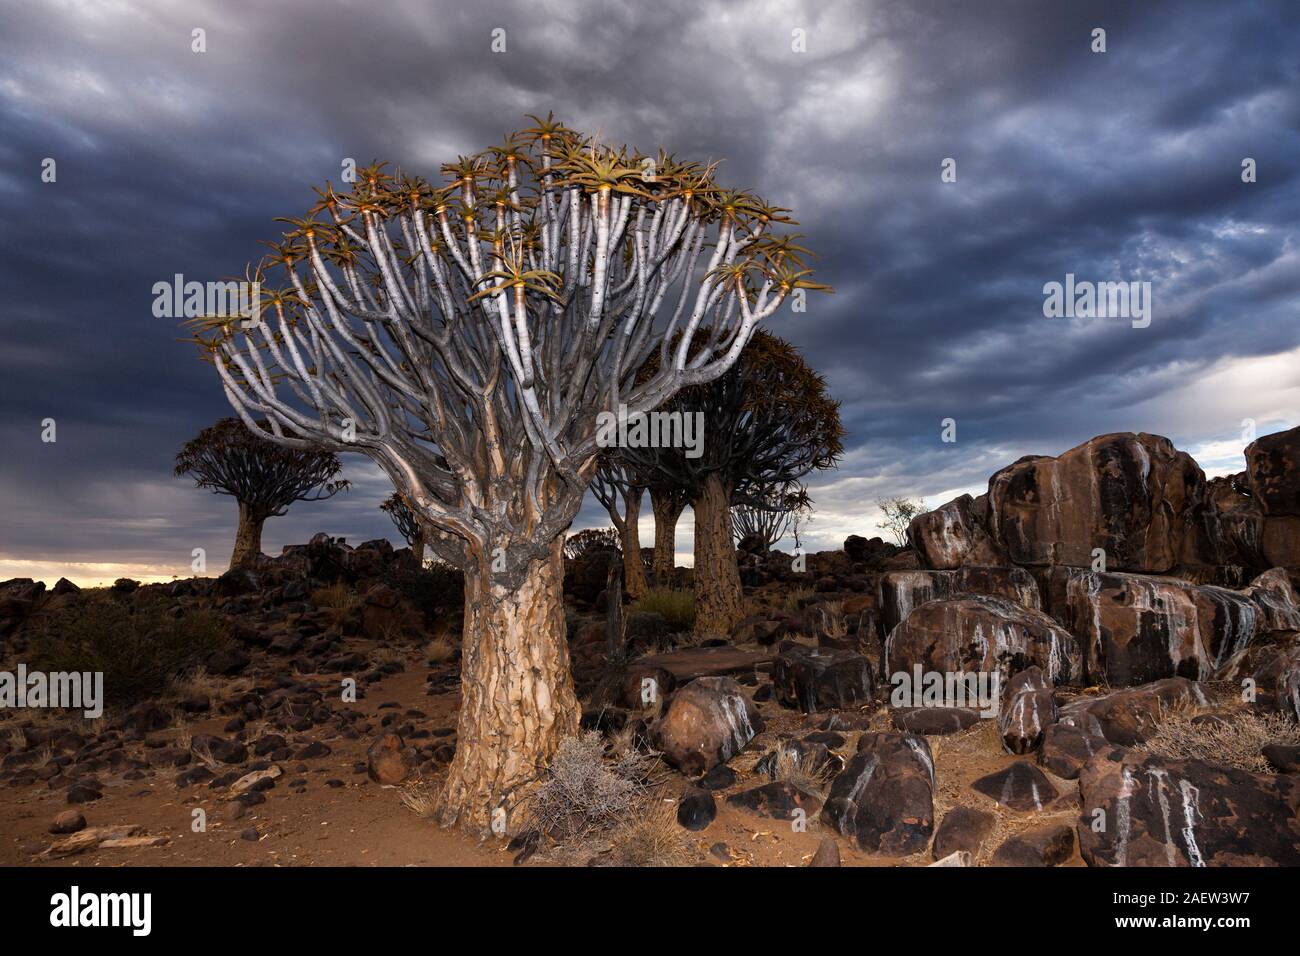 Quiver Tree Forest, Aloe dichotoma, evening, Keetmanshoop, Karas Region, Namibia, Southern Africa, Africa Stock Photo